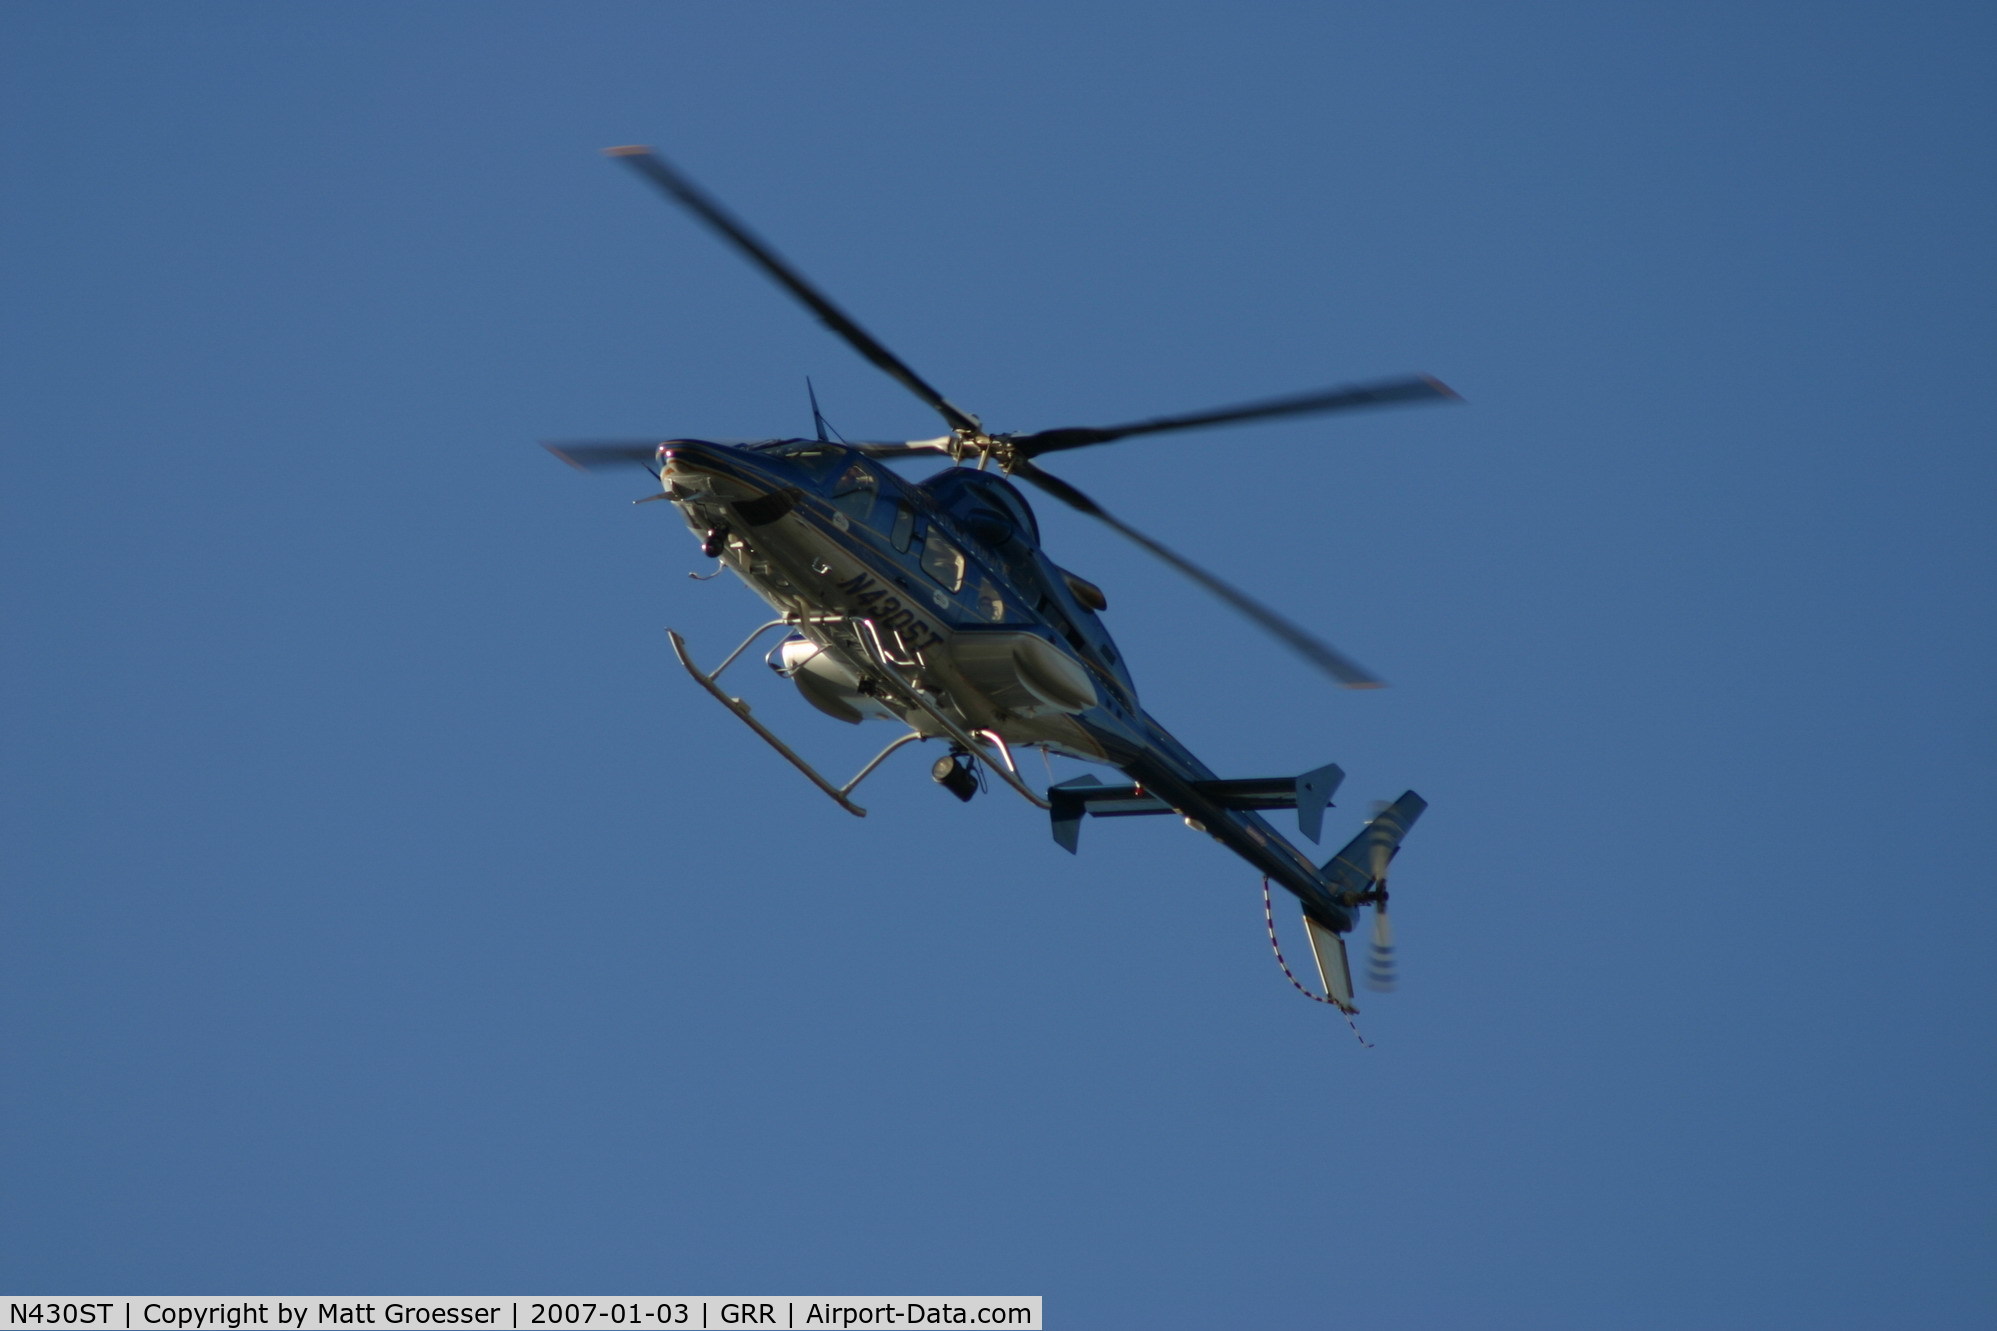 N430ST, 2000 Bell 430 C/N 49071, MSP helicopter over Grand Rapids, MI for Gerald R. Ford funeral security detail